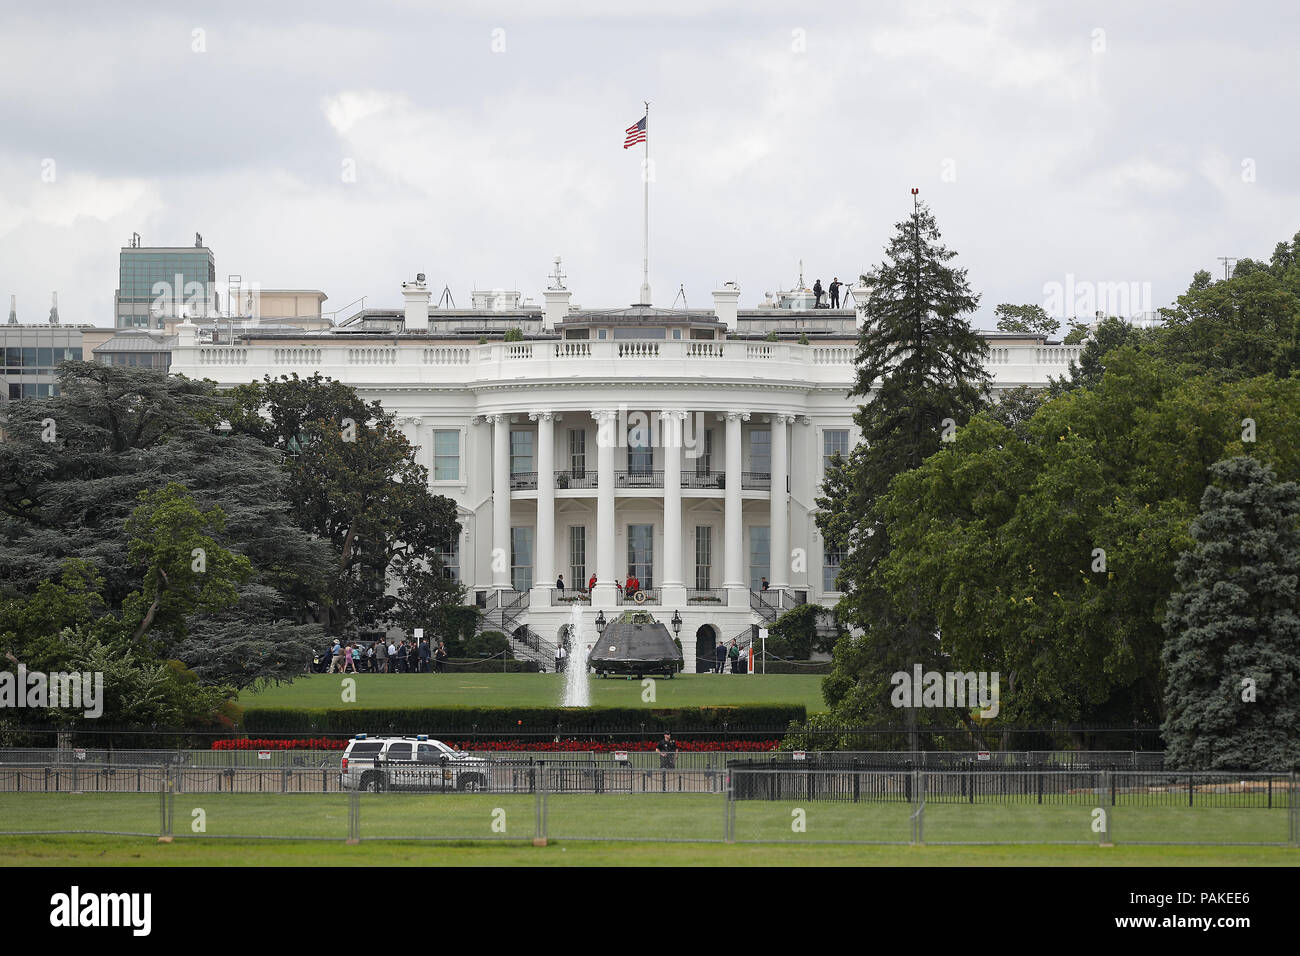 Washington, DC, USA. 23rd July, 2018. NASA's Orion spacecraft made by Lockheed Martin is seen on display on the South Lawn at the White House in Washington, DC, the United States, on July 23, 2018. Credit: Ting Shen/Xinhua/Alamy Live News Stock Photo